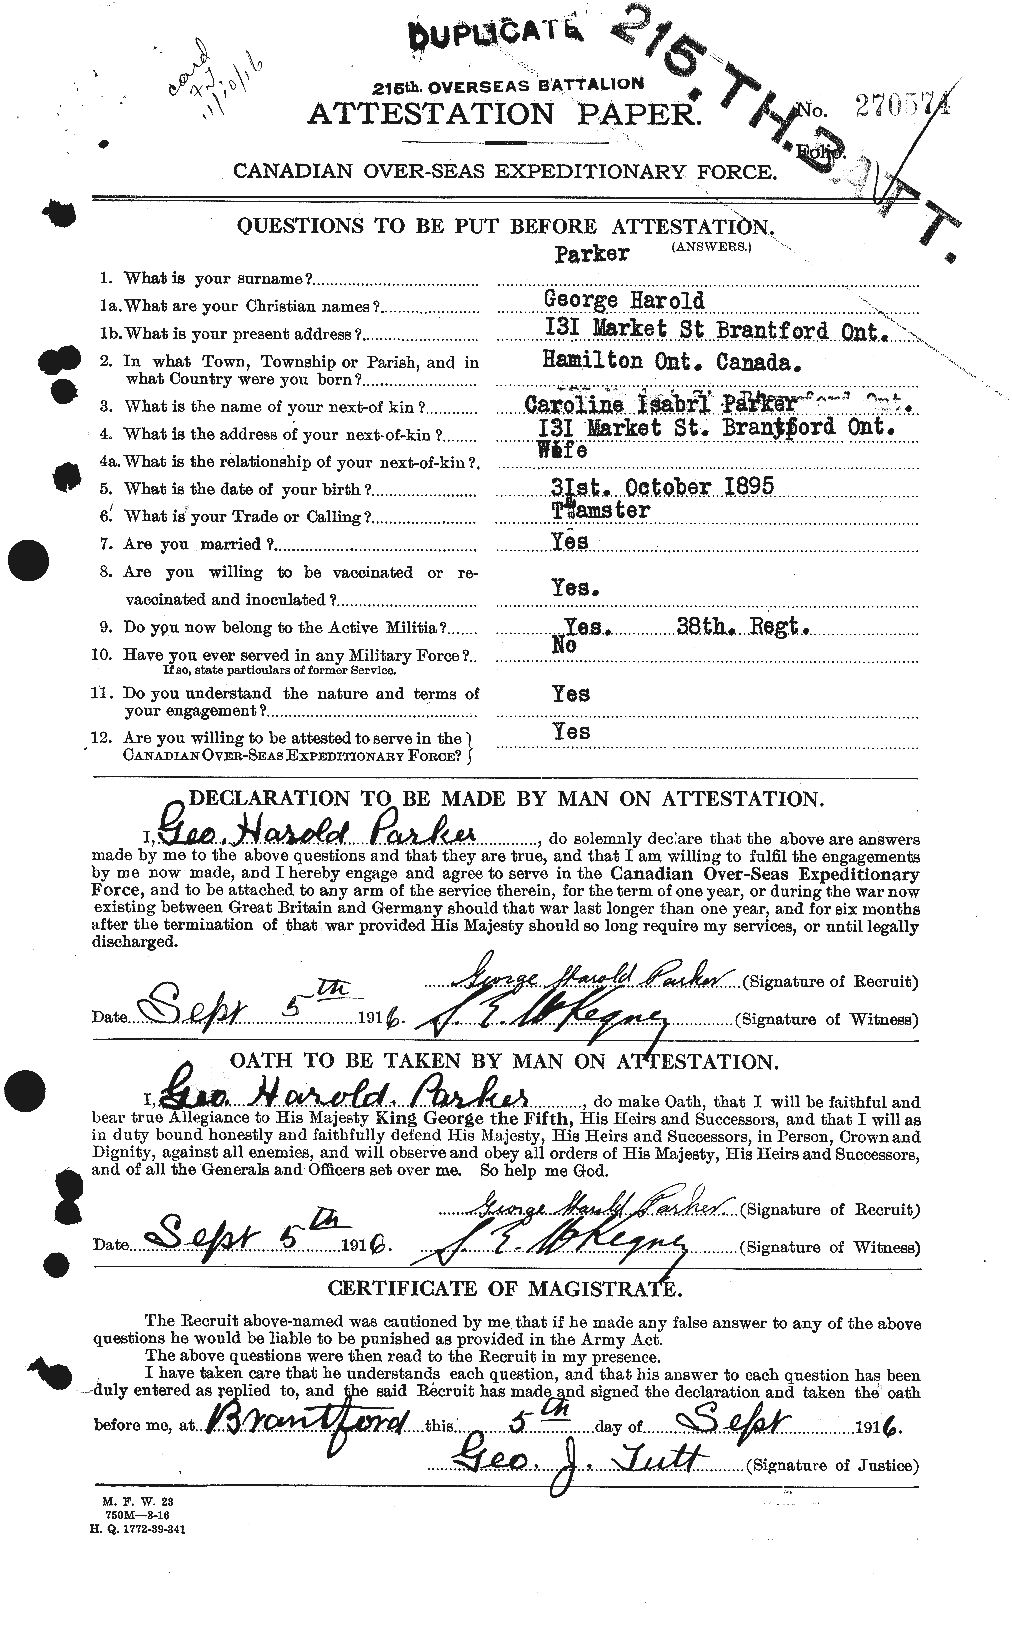 Personnel Records of the First World War - CEF 565263a